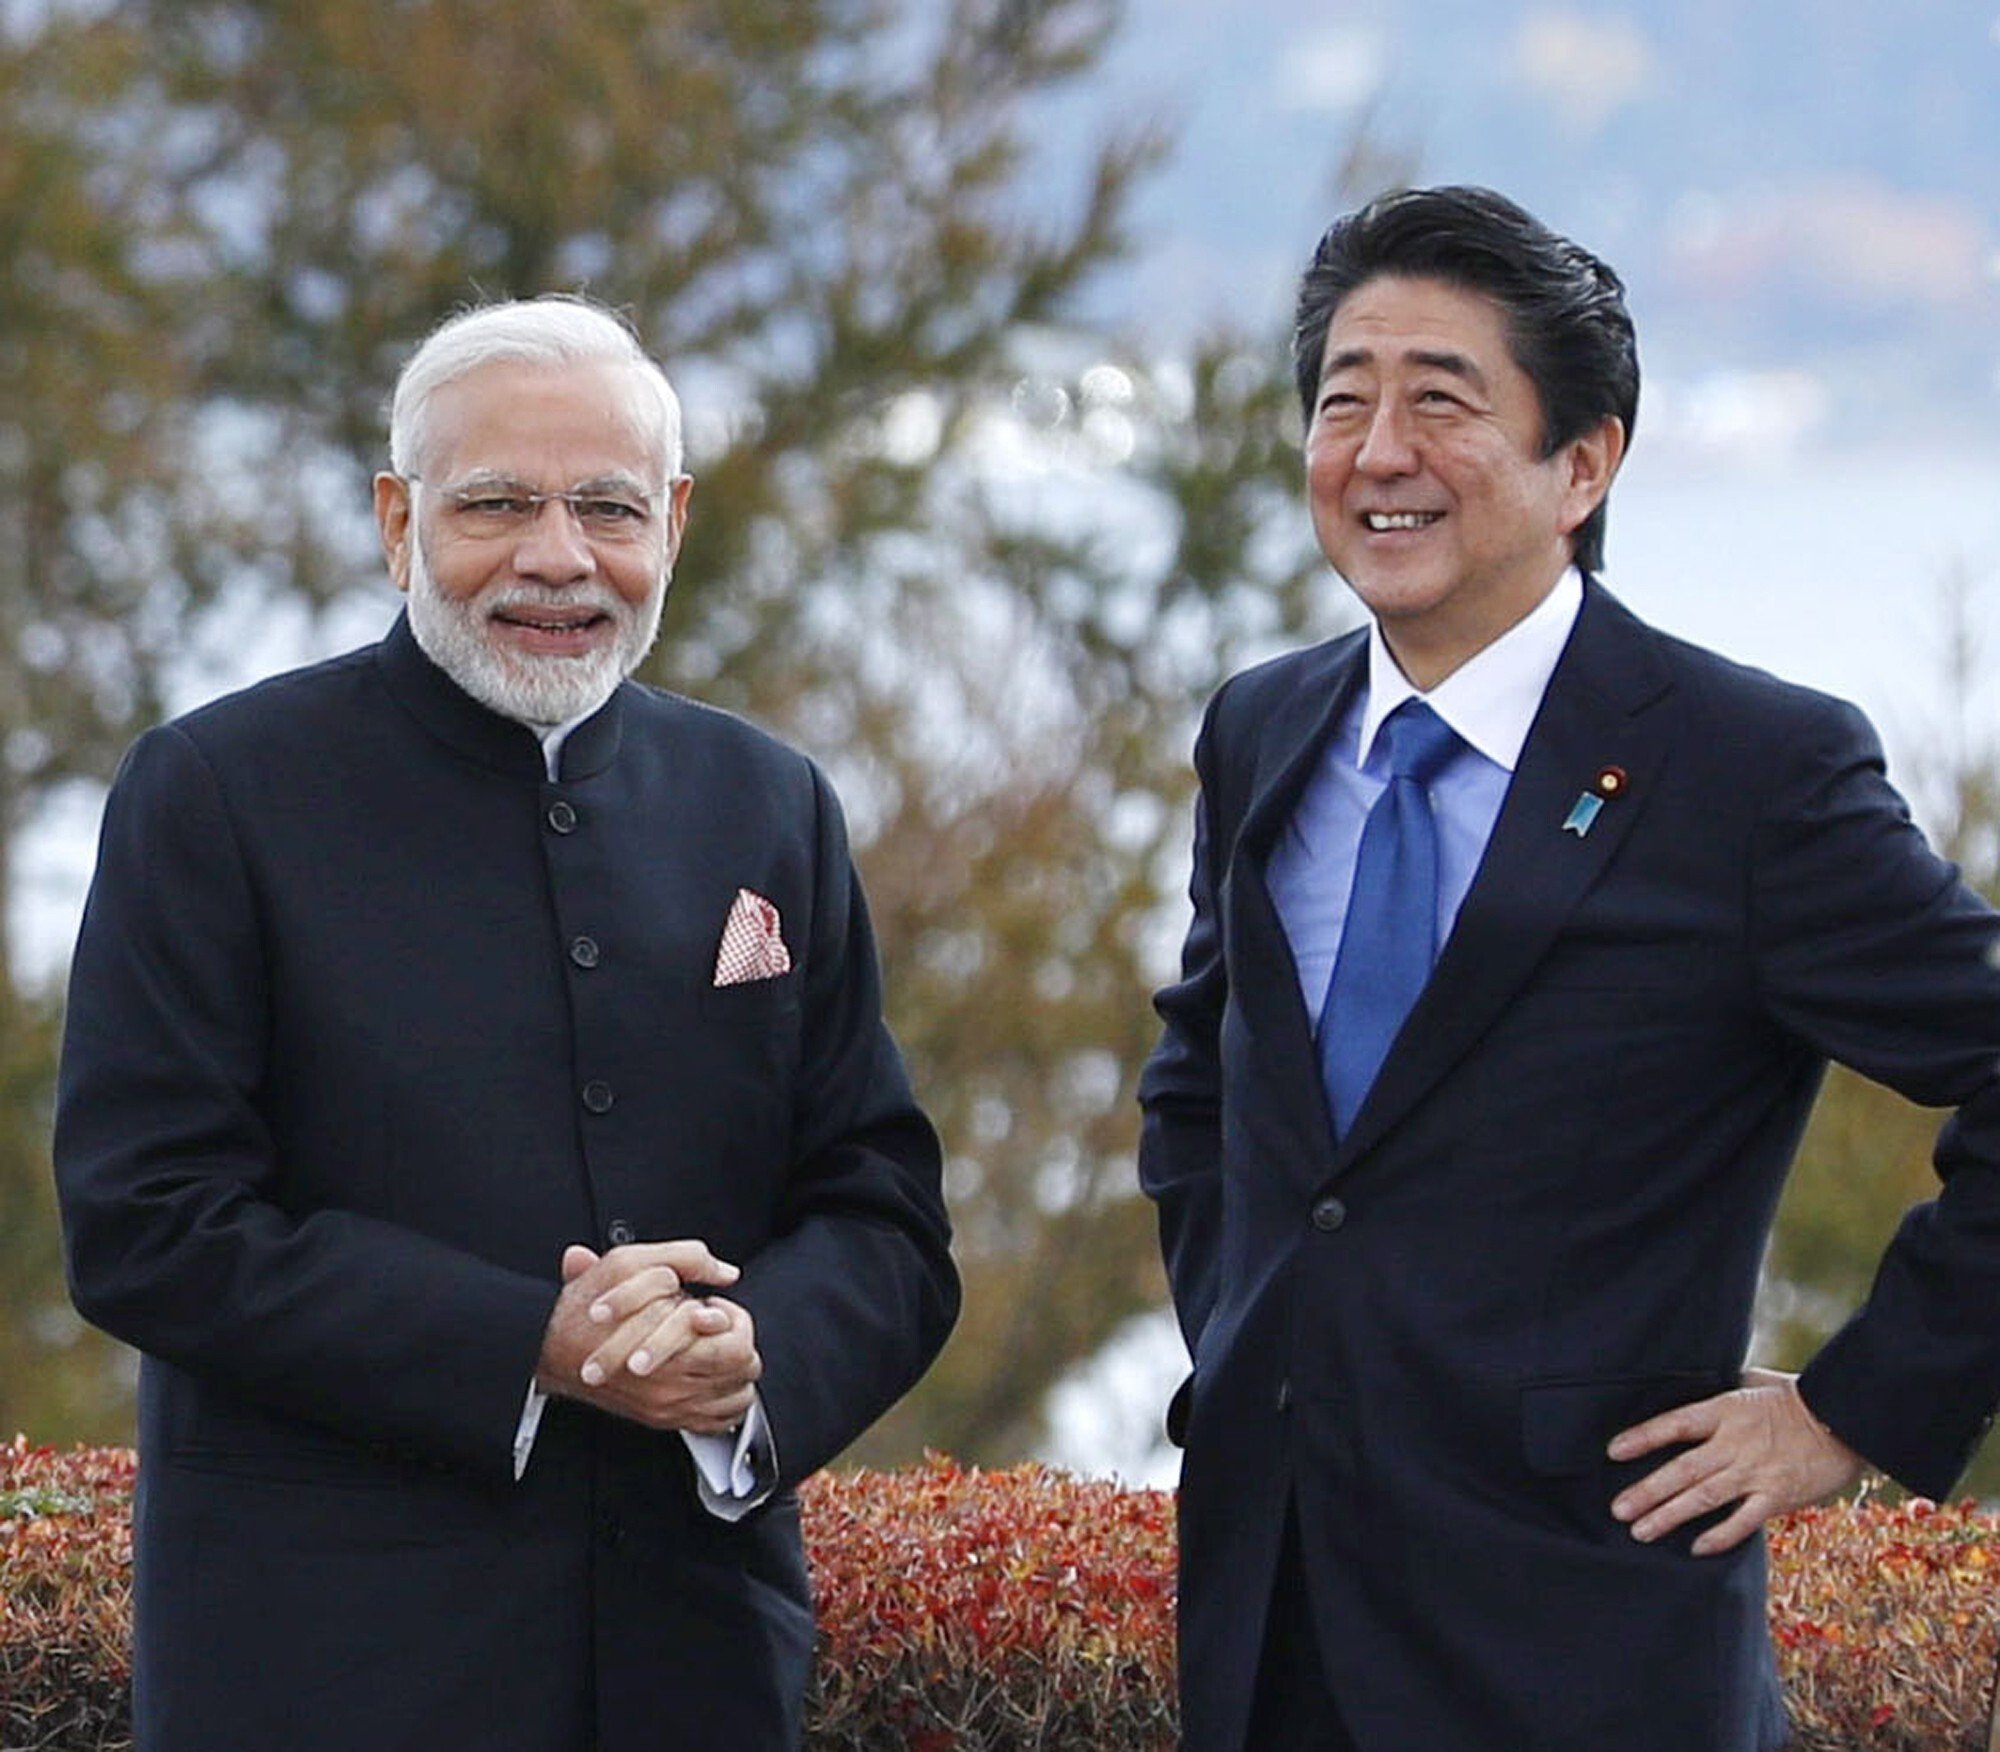 India’s Prime Minister Narendra Modi and Japan’s Prime Minister Shinzo Abe share a light moment in a hotel garden in Yamanakako village, Yamanashi prefecture, Japan, in October 2018. Photo: AP